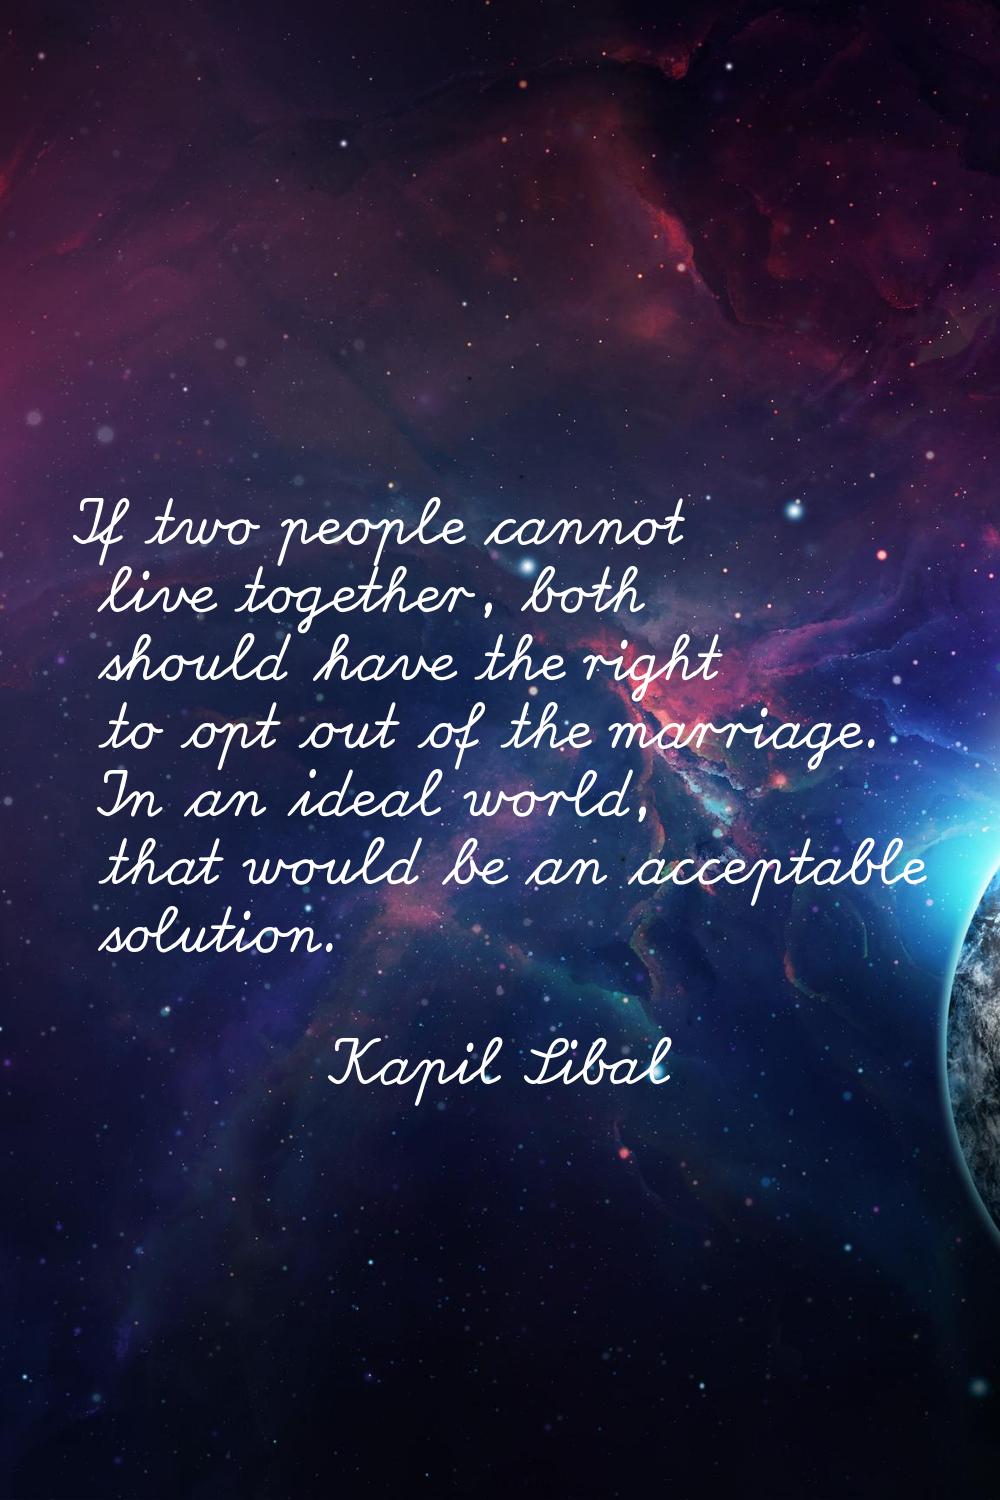 If two people cannot live together, both should have the right to opt out of the marriage. In an id